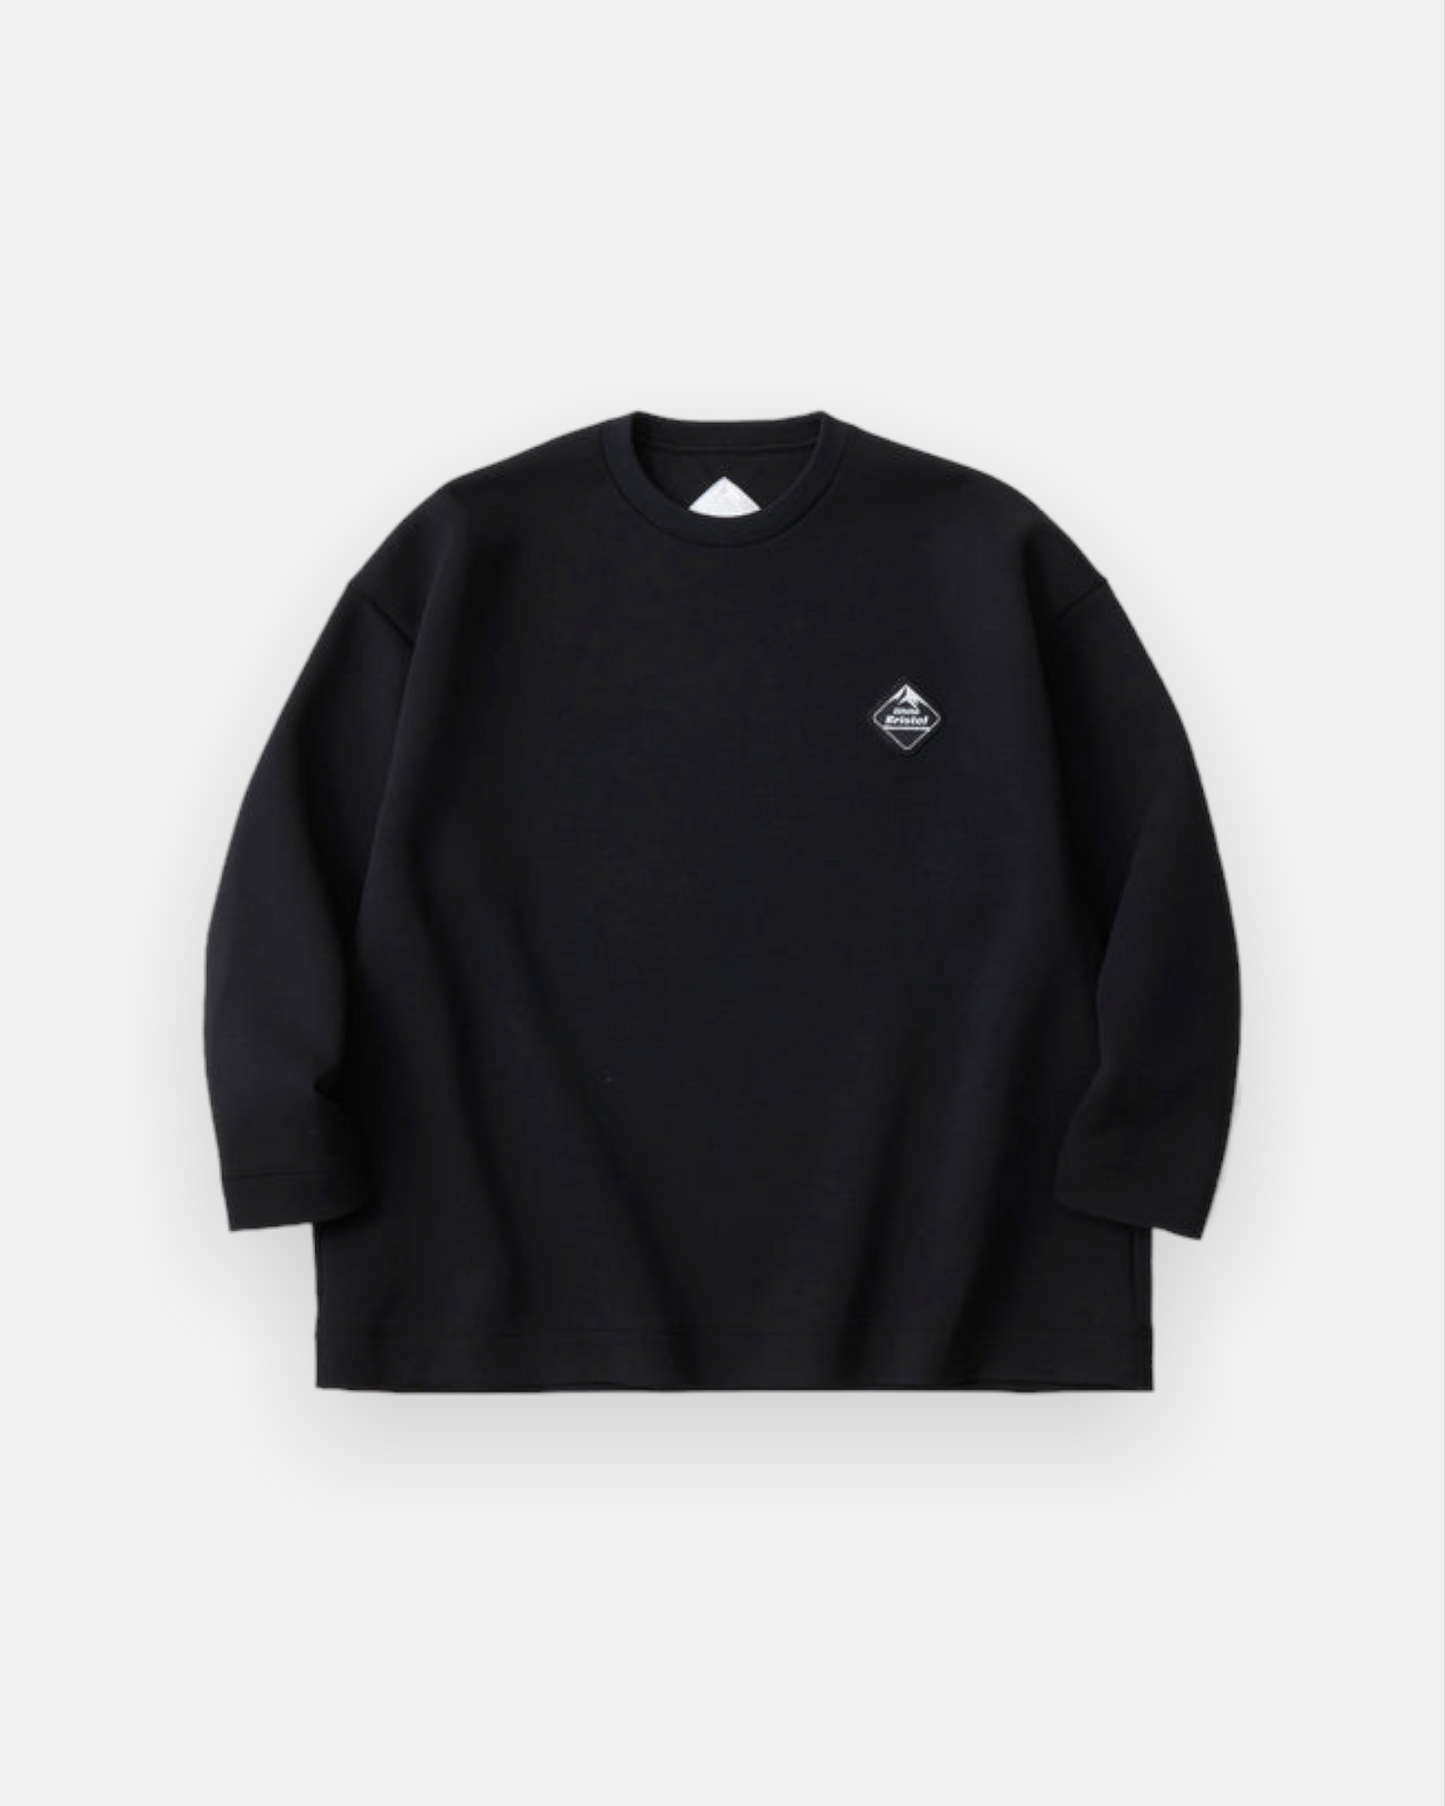 WHITE MOUNTAINEERING x F.C.REAL BRISTOL SWEAT PULLOVER (BLACK)